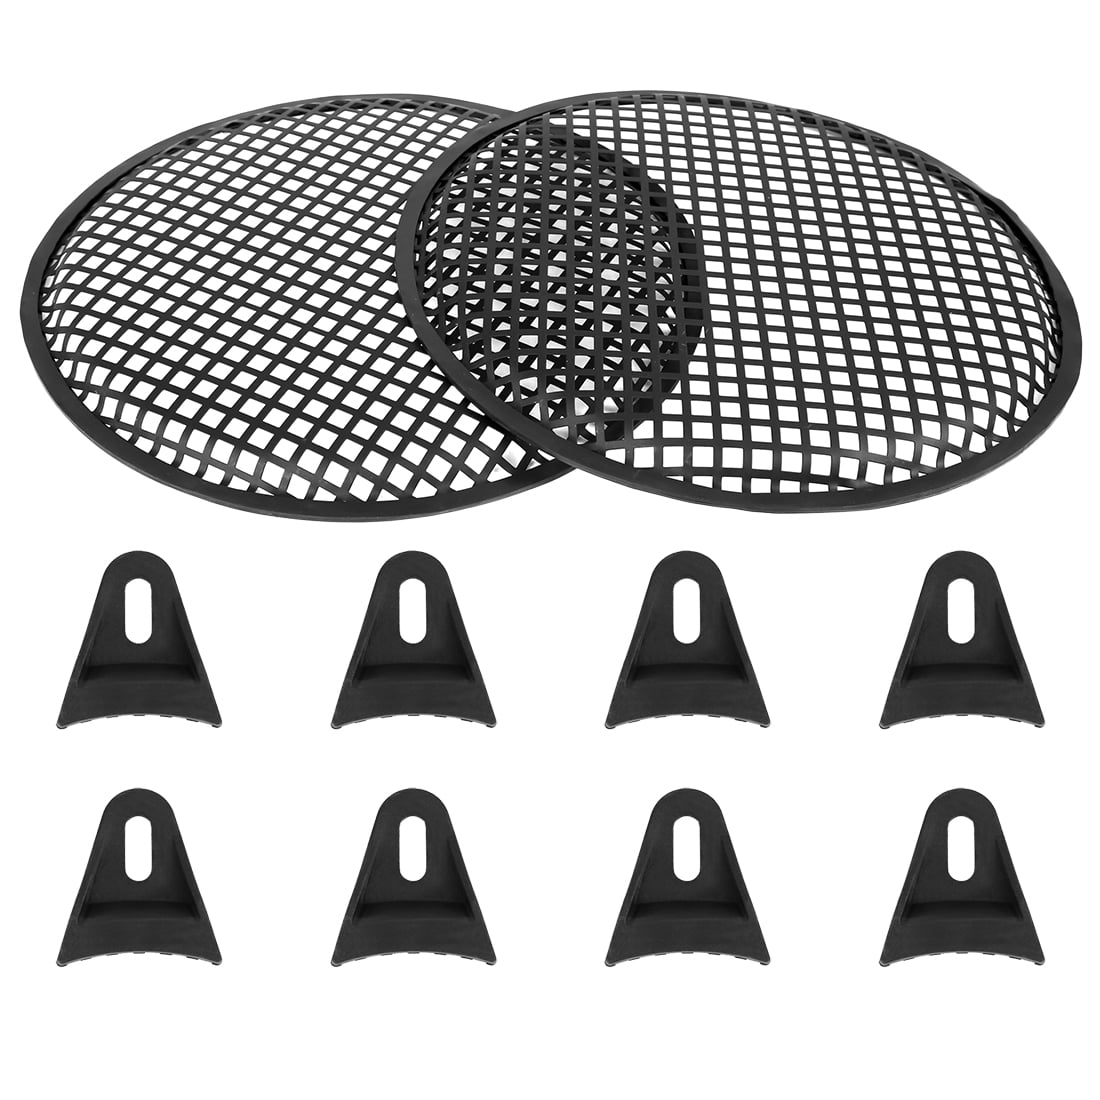 X AUTOHAUX 2pcs 10 Inch Black Metal Car Bar Grille Speaker Subwoofer Grill Cover Protector 